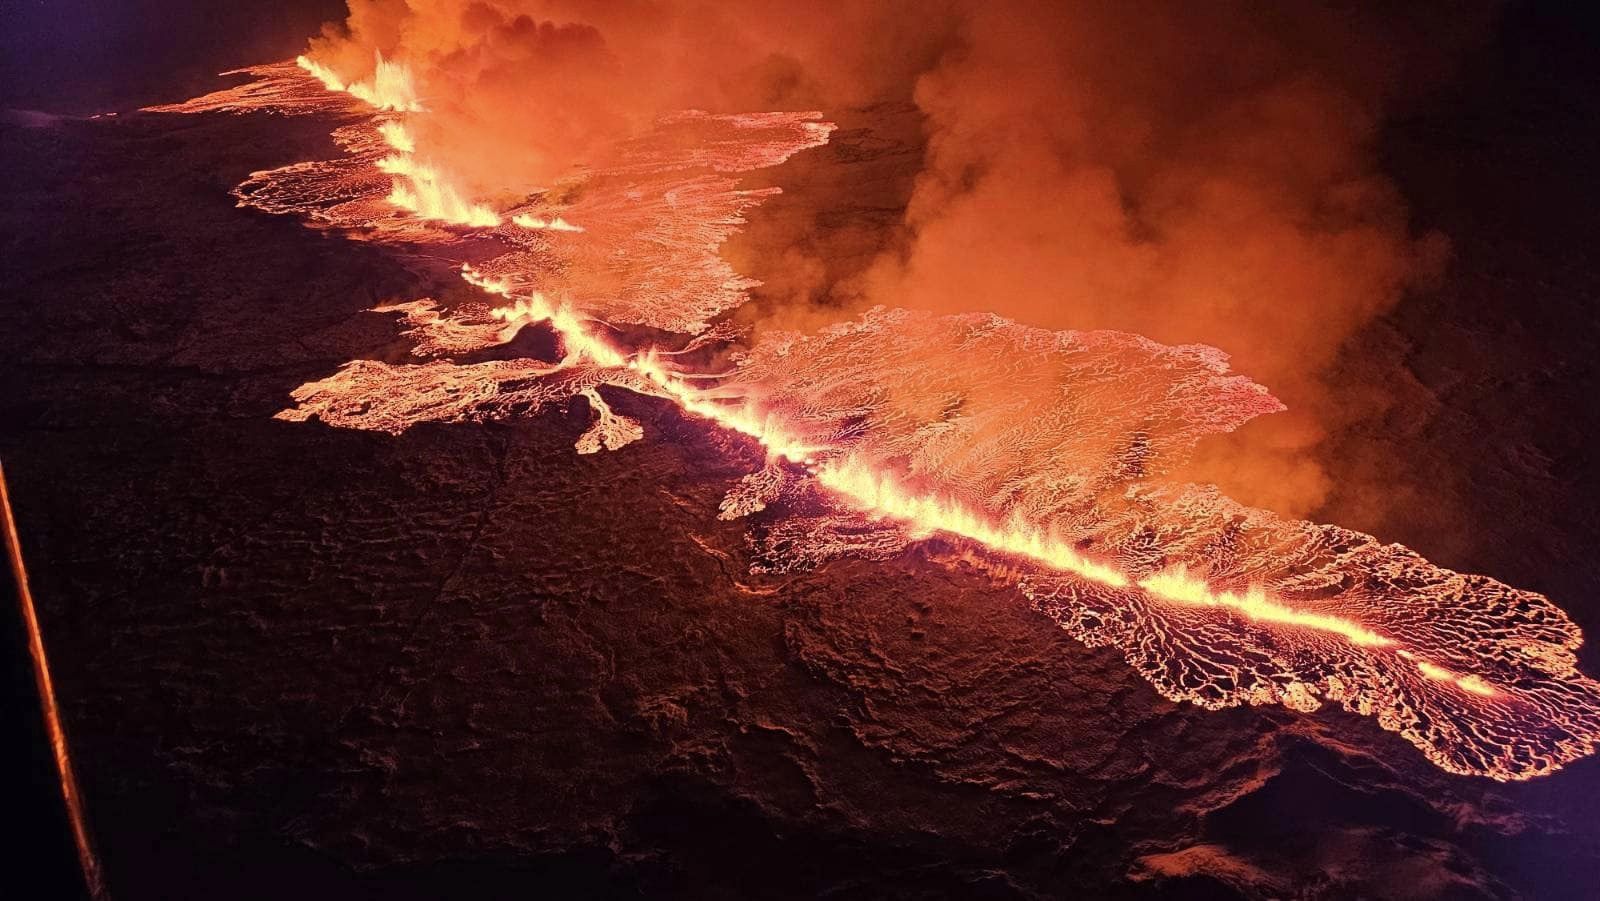 Aerial view of a long volcanic fissure and lava flows at night